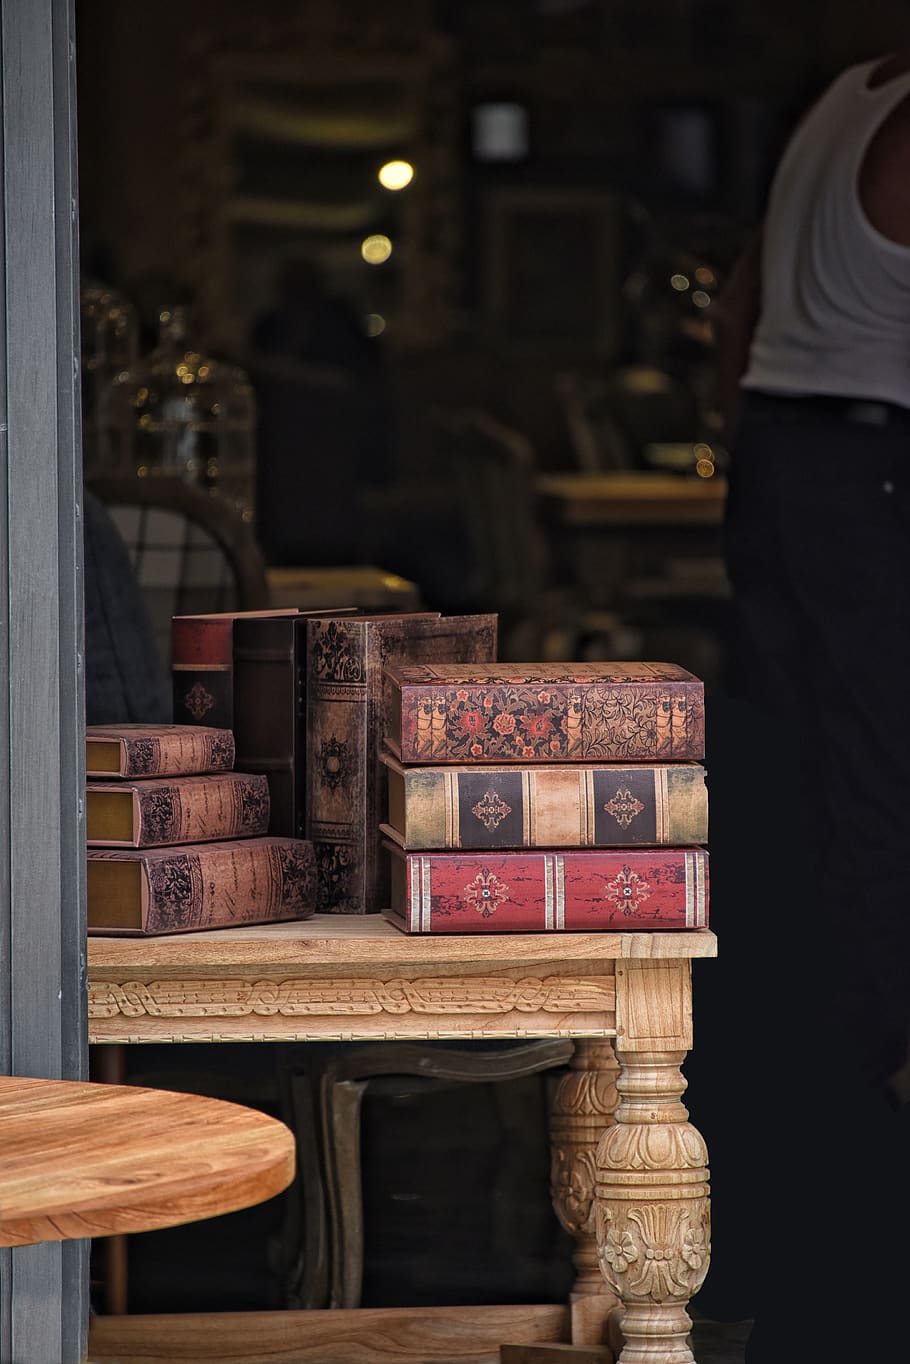 antique dealer, books, old books, bookseller, binders, history, wood - material, table, indoors, focus on foreground